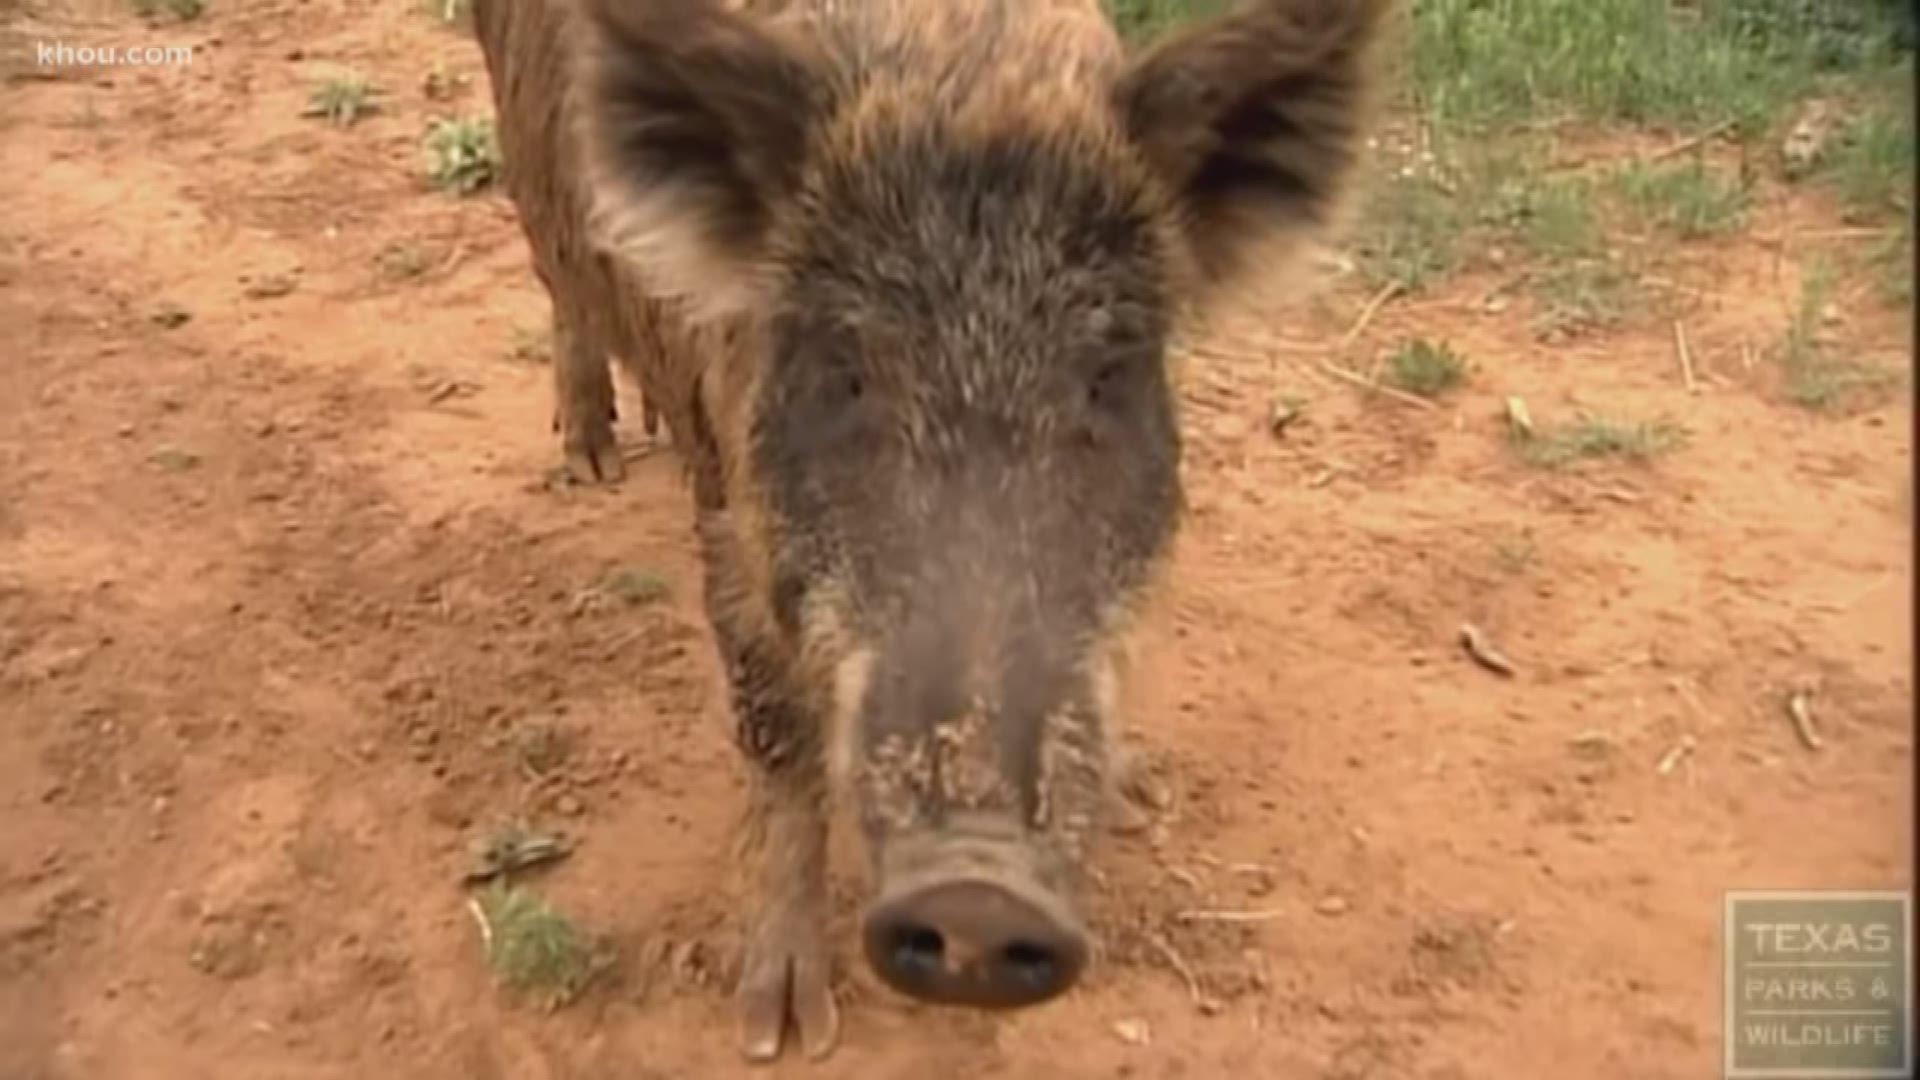 The Chambers County Sheriff's Office says there is new interest in tackling the hundreds of feral hogs in this area after the death of a caretaker by feral hogs.